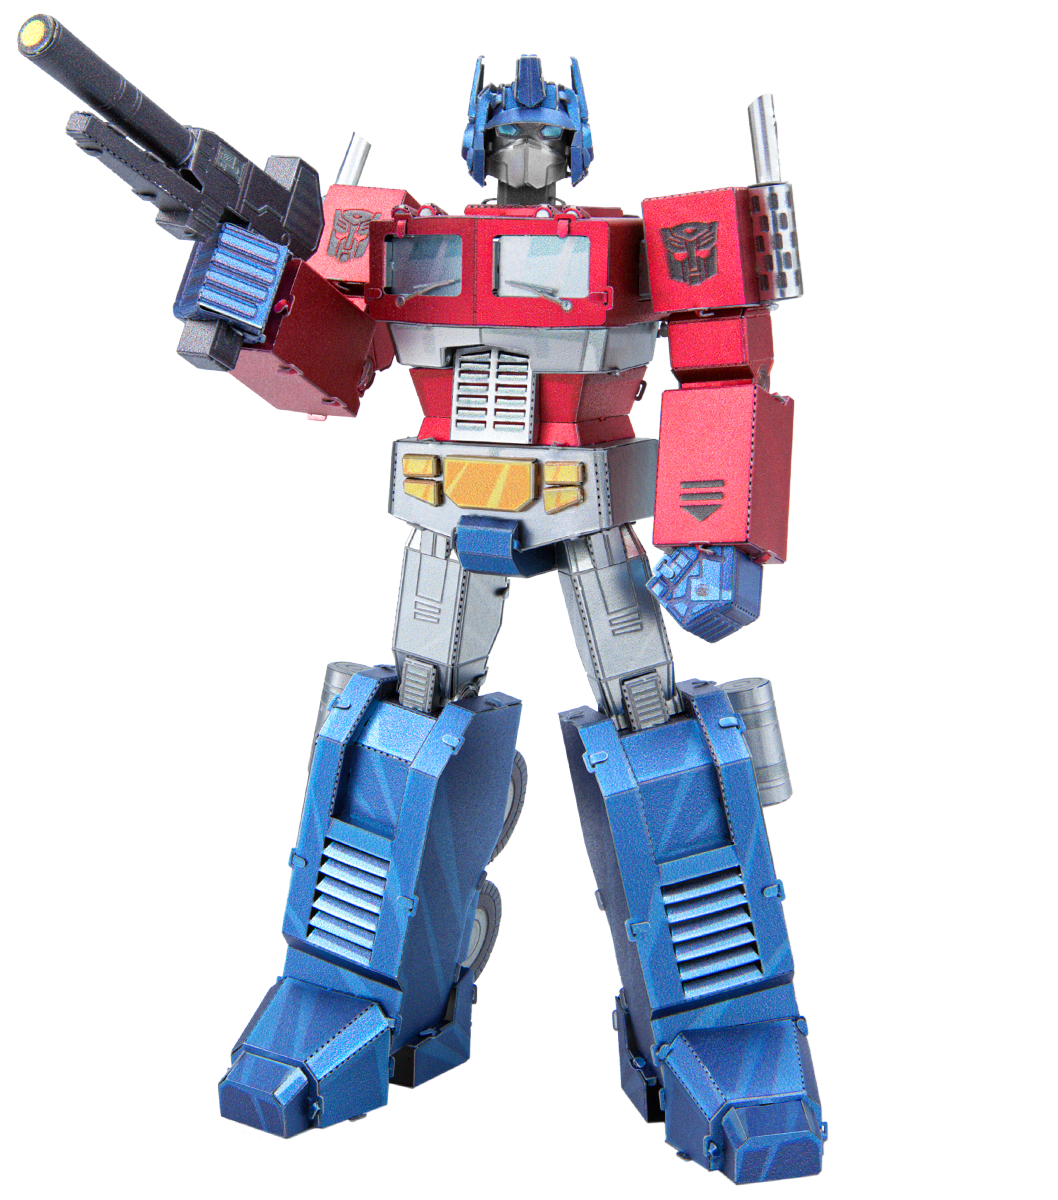 Fascinations Metal Earth ICONX Series Optimus Prime 3d Model Kit ICX204 for sale online 